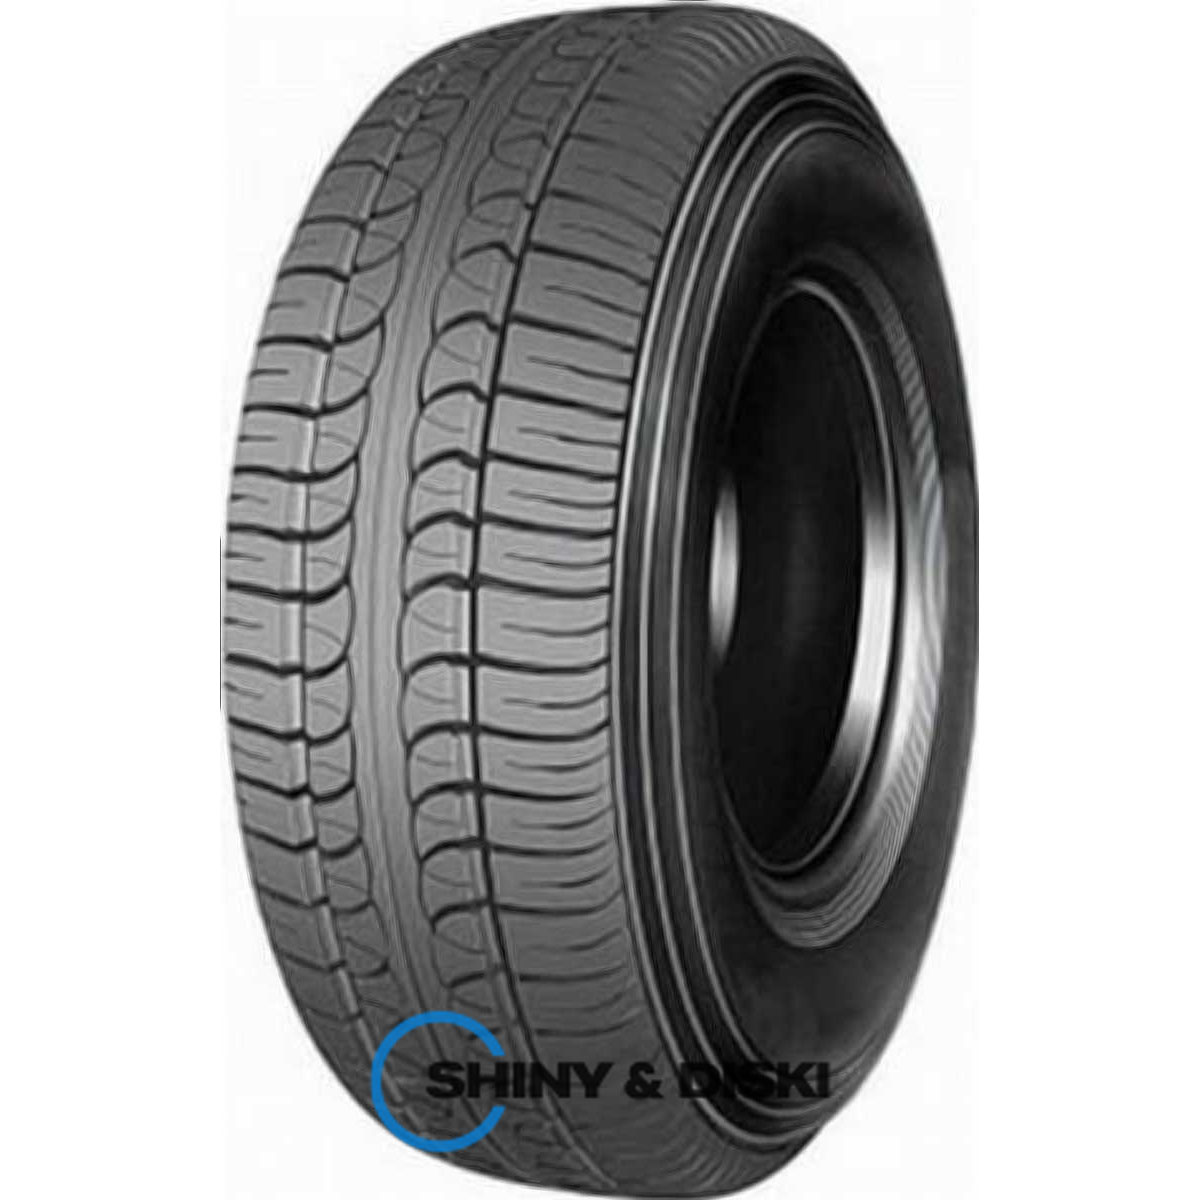 infinity inf-030 155/70 r13 75t